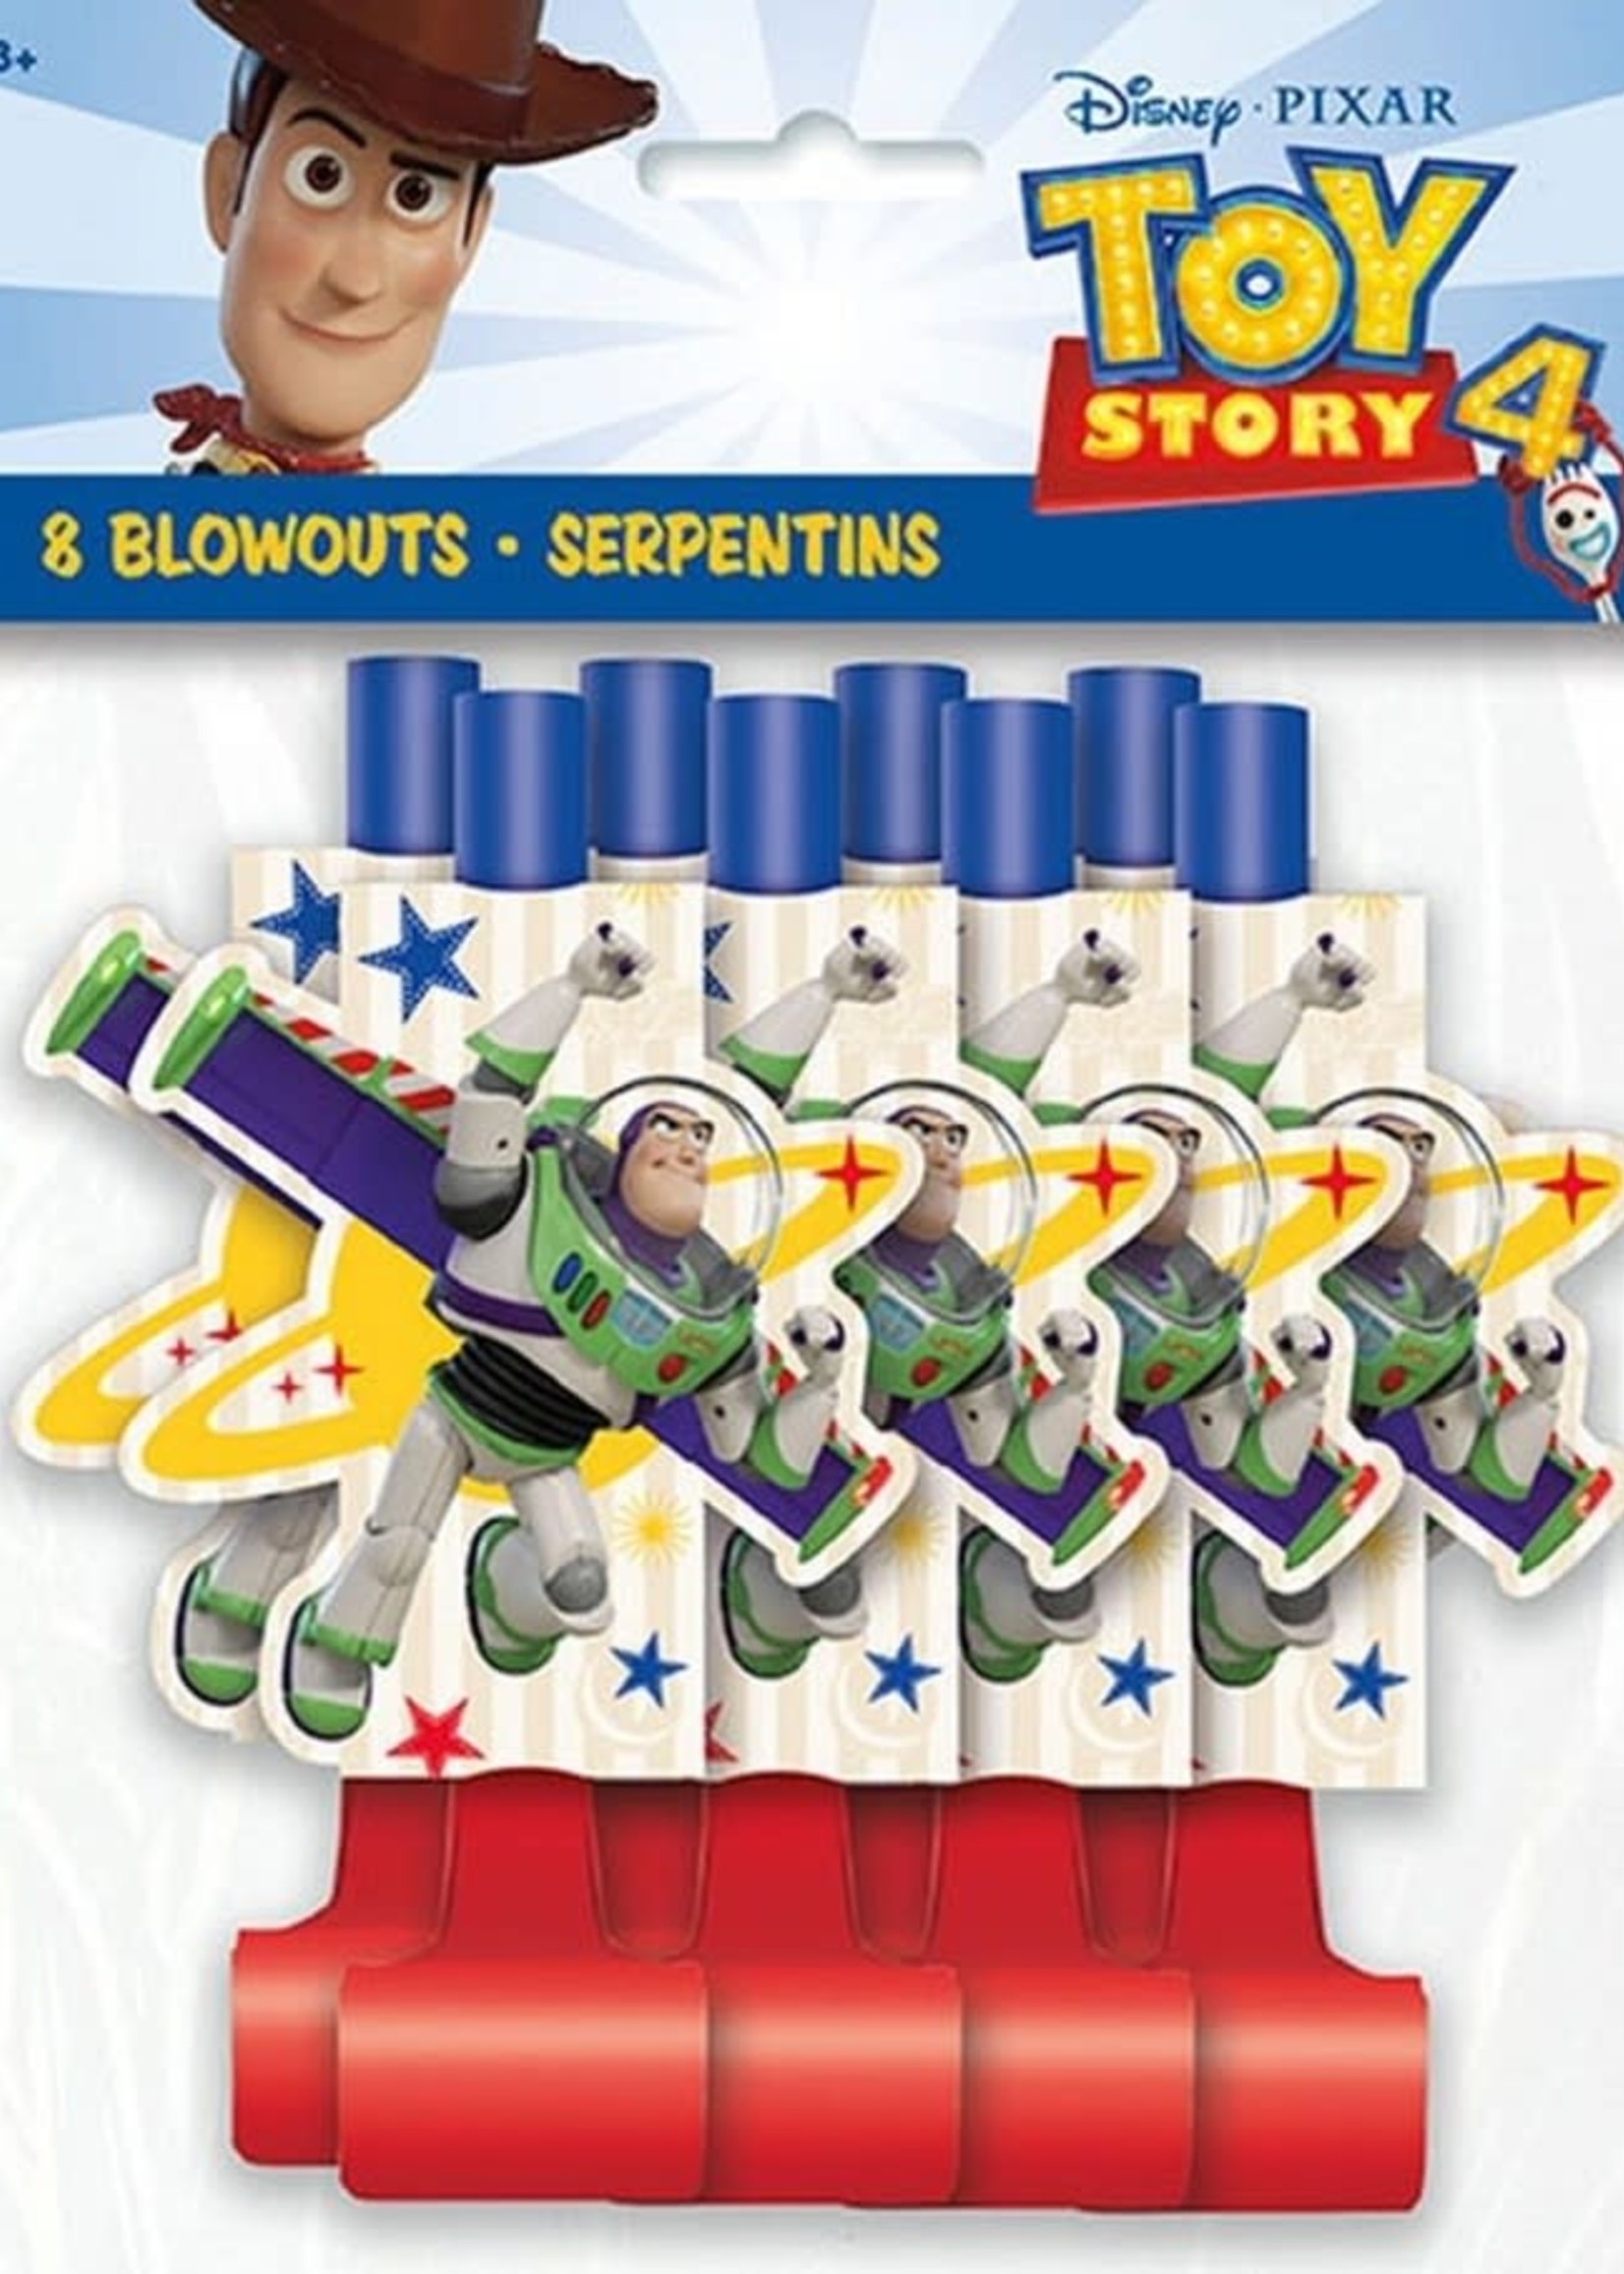 Disney's Toy Story 4 Blowouts (8)